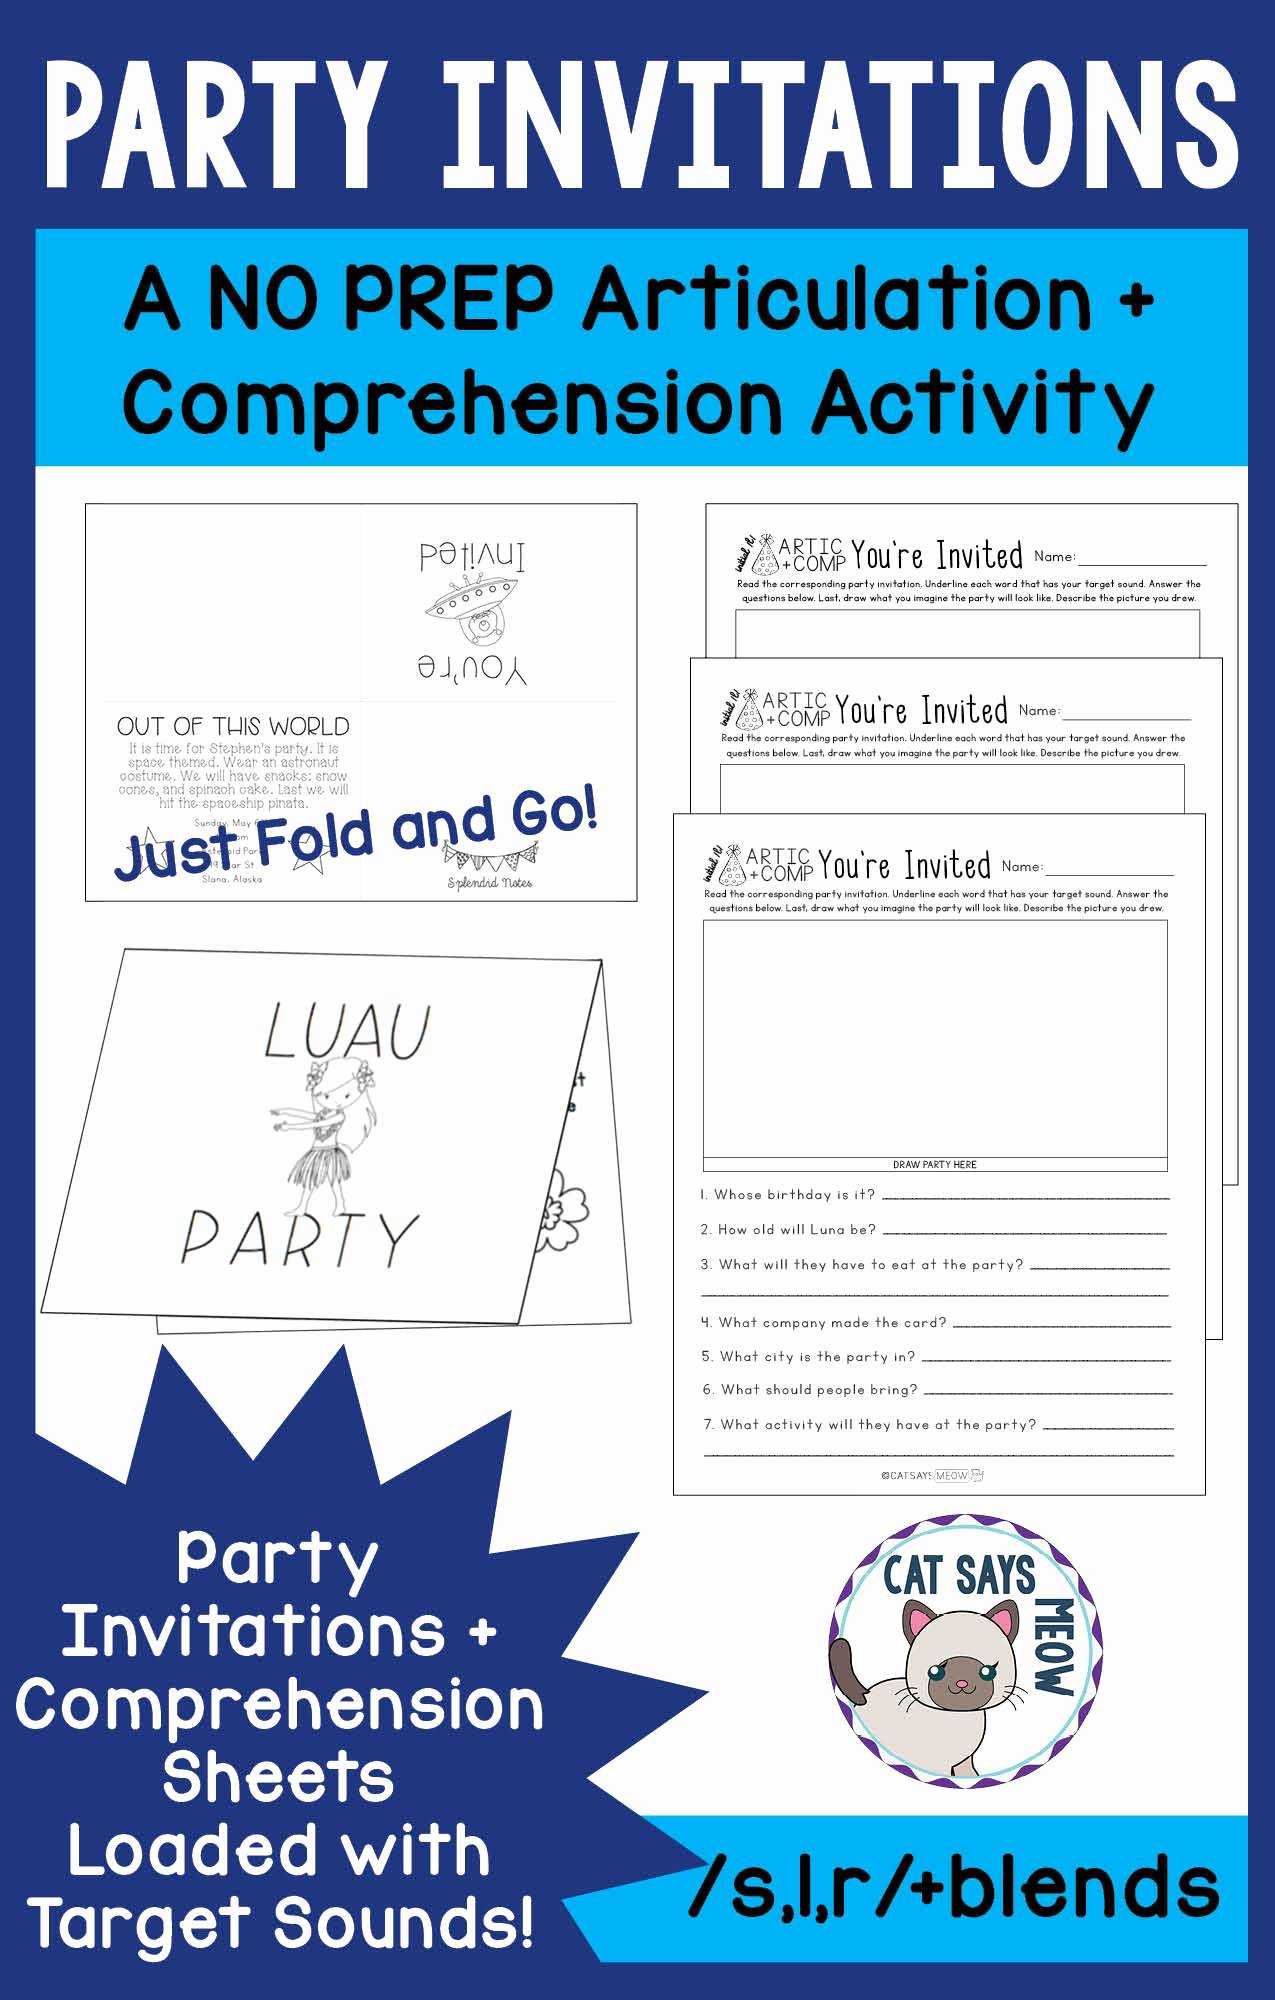 Food Chains and Webs Worksheet together with Free Food Worksheets with Party Invitations A No Prep Artic Reading